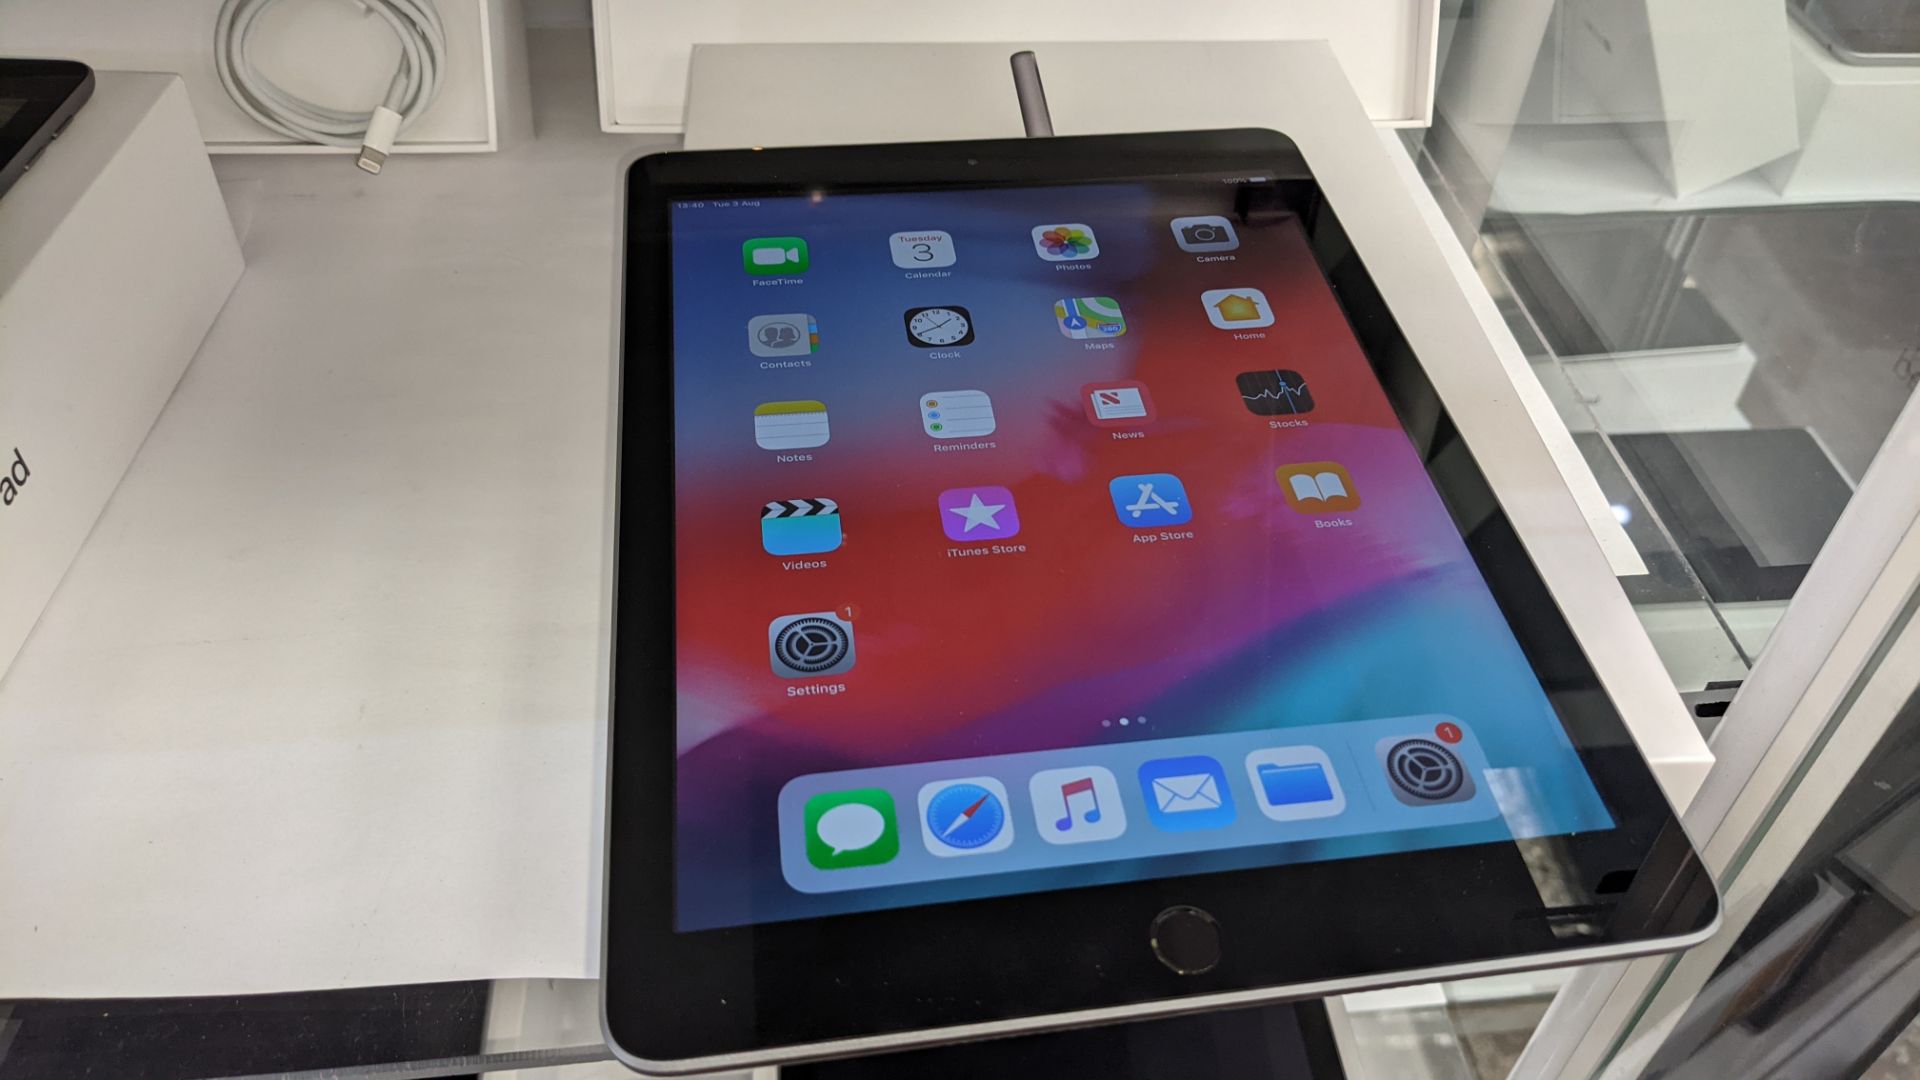 Apple iPad (space grey) 5th generation 32Gb Wi-Fi 9.7" Retina screen. Product code A1822. Apple A9 - Image 3 of 11